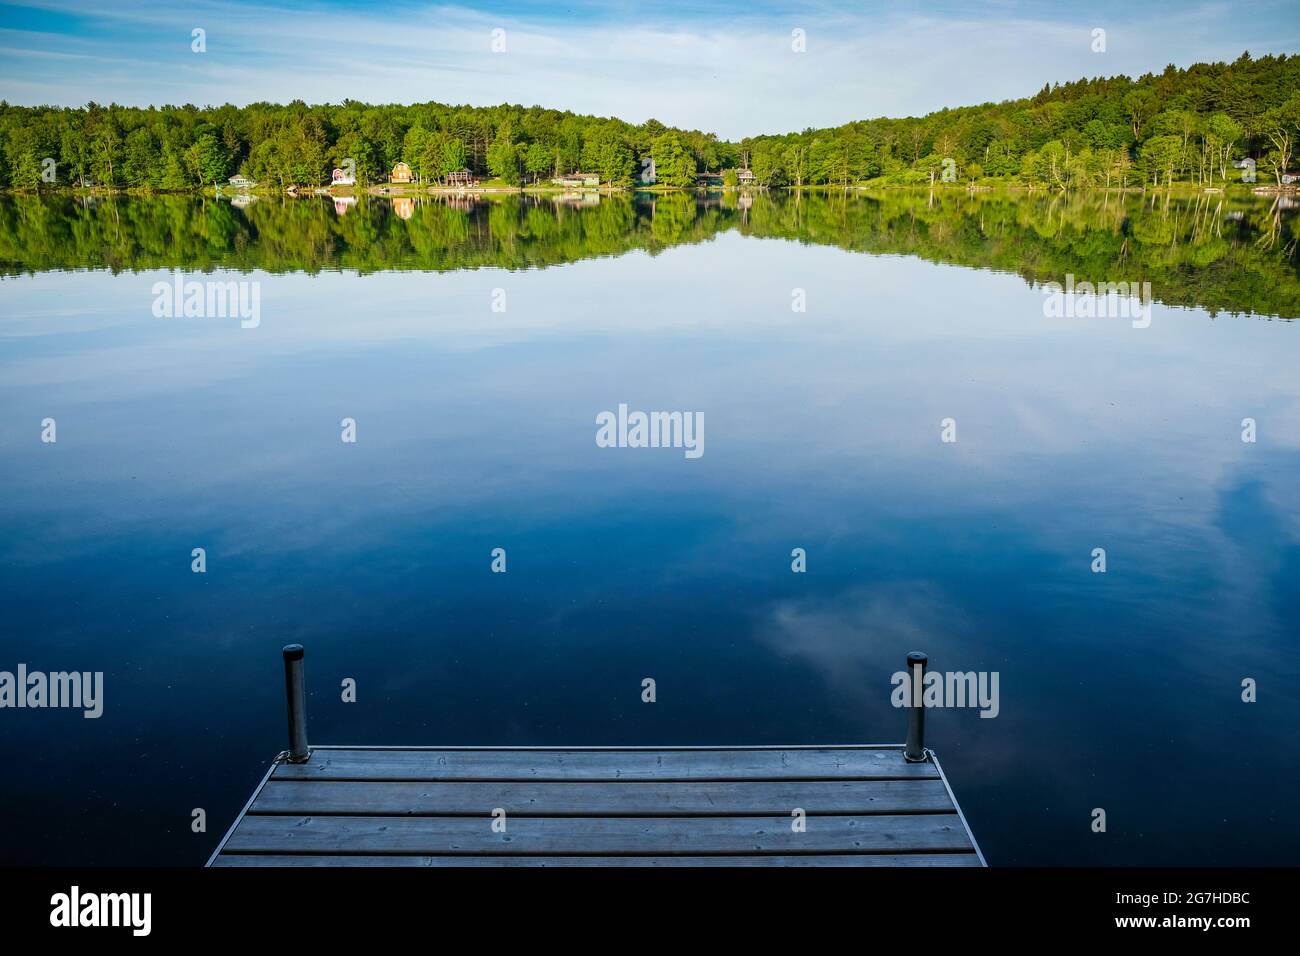 Beautifully placid lake seen from dock on a lake near Copperstown, NY, USA. Stock Photo